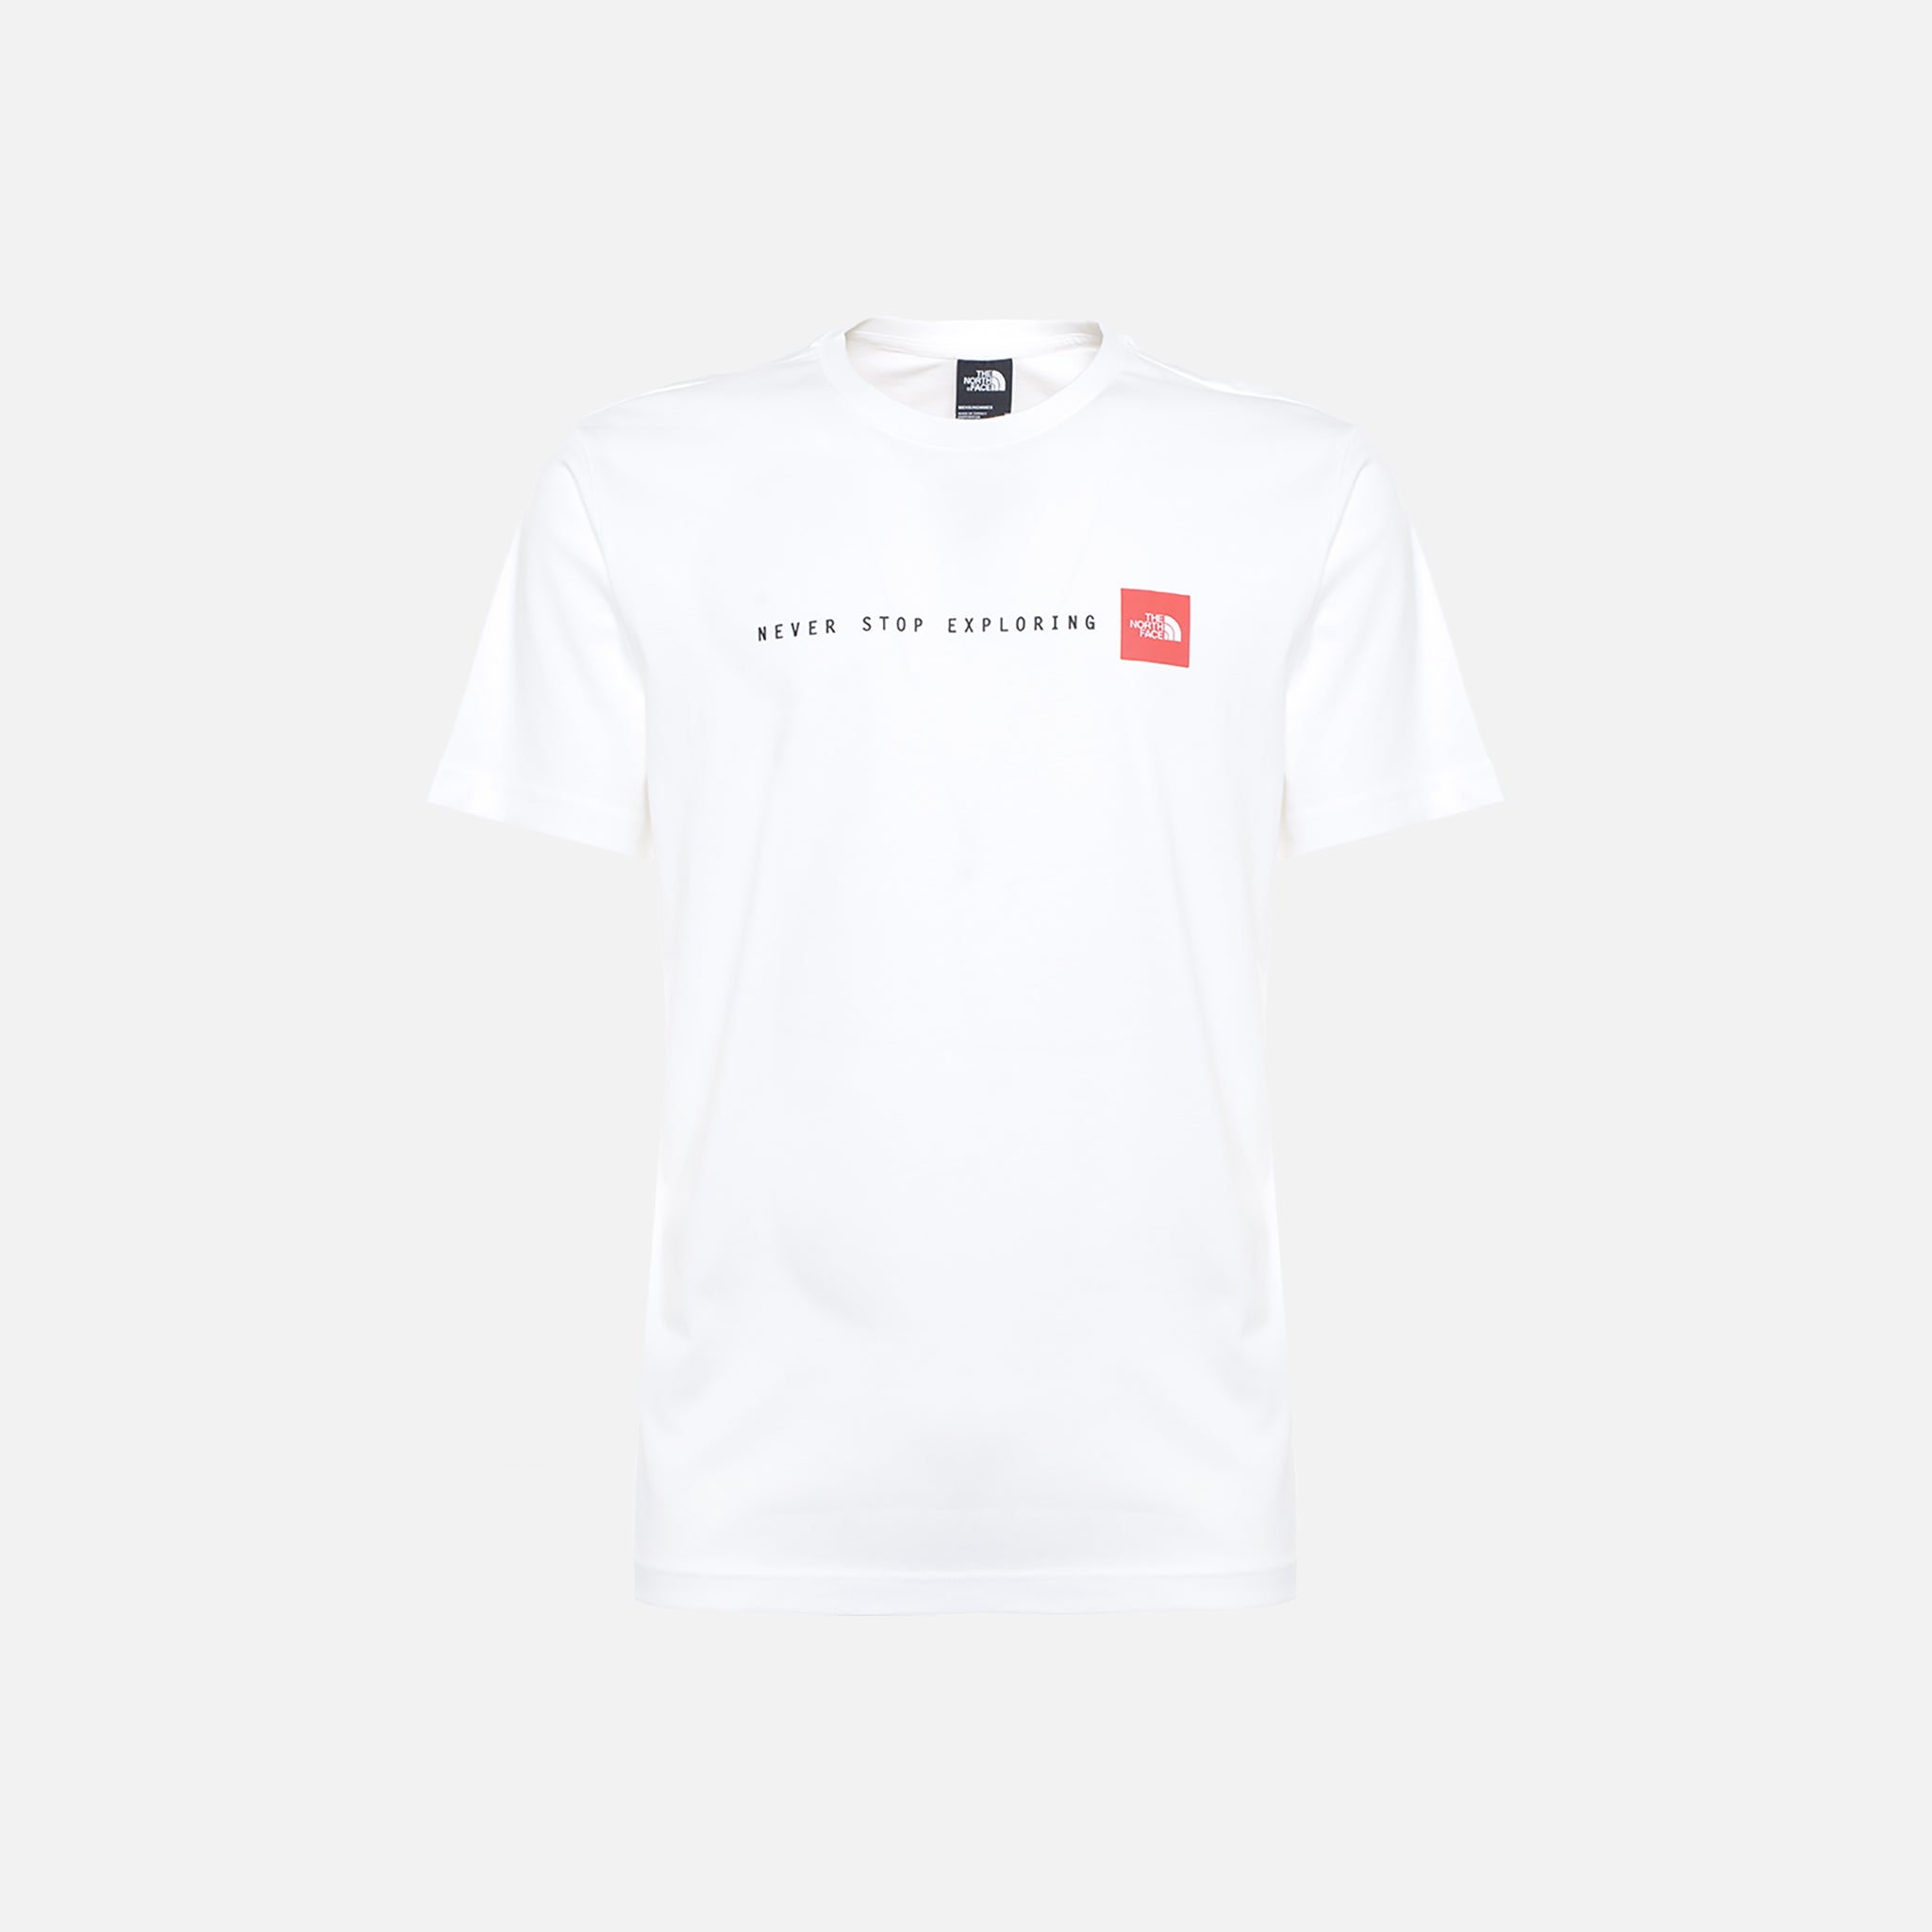 THE NORTH FACE T-SHIRT S/S NEVER STOP EXPLORING